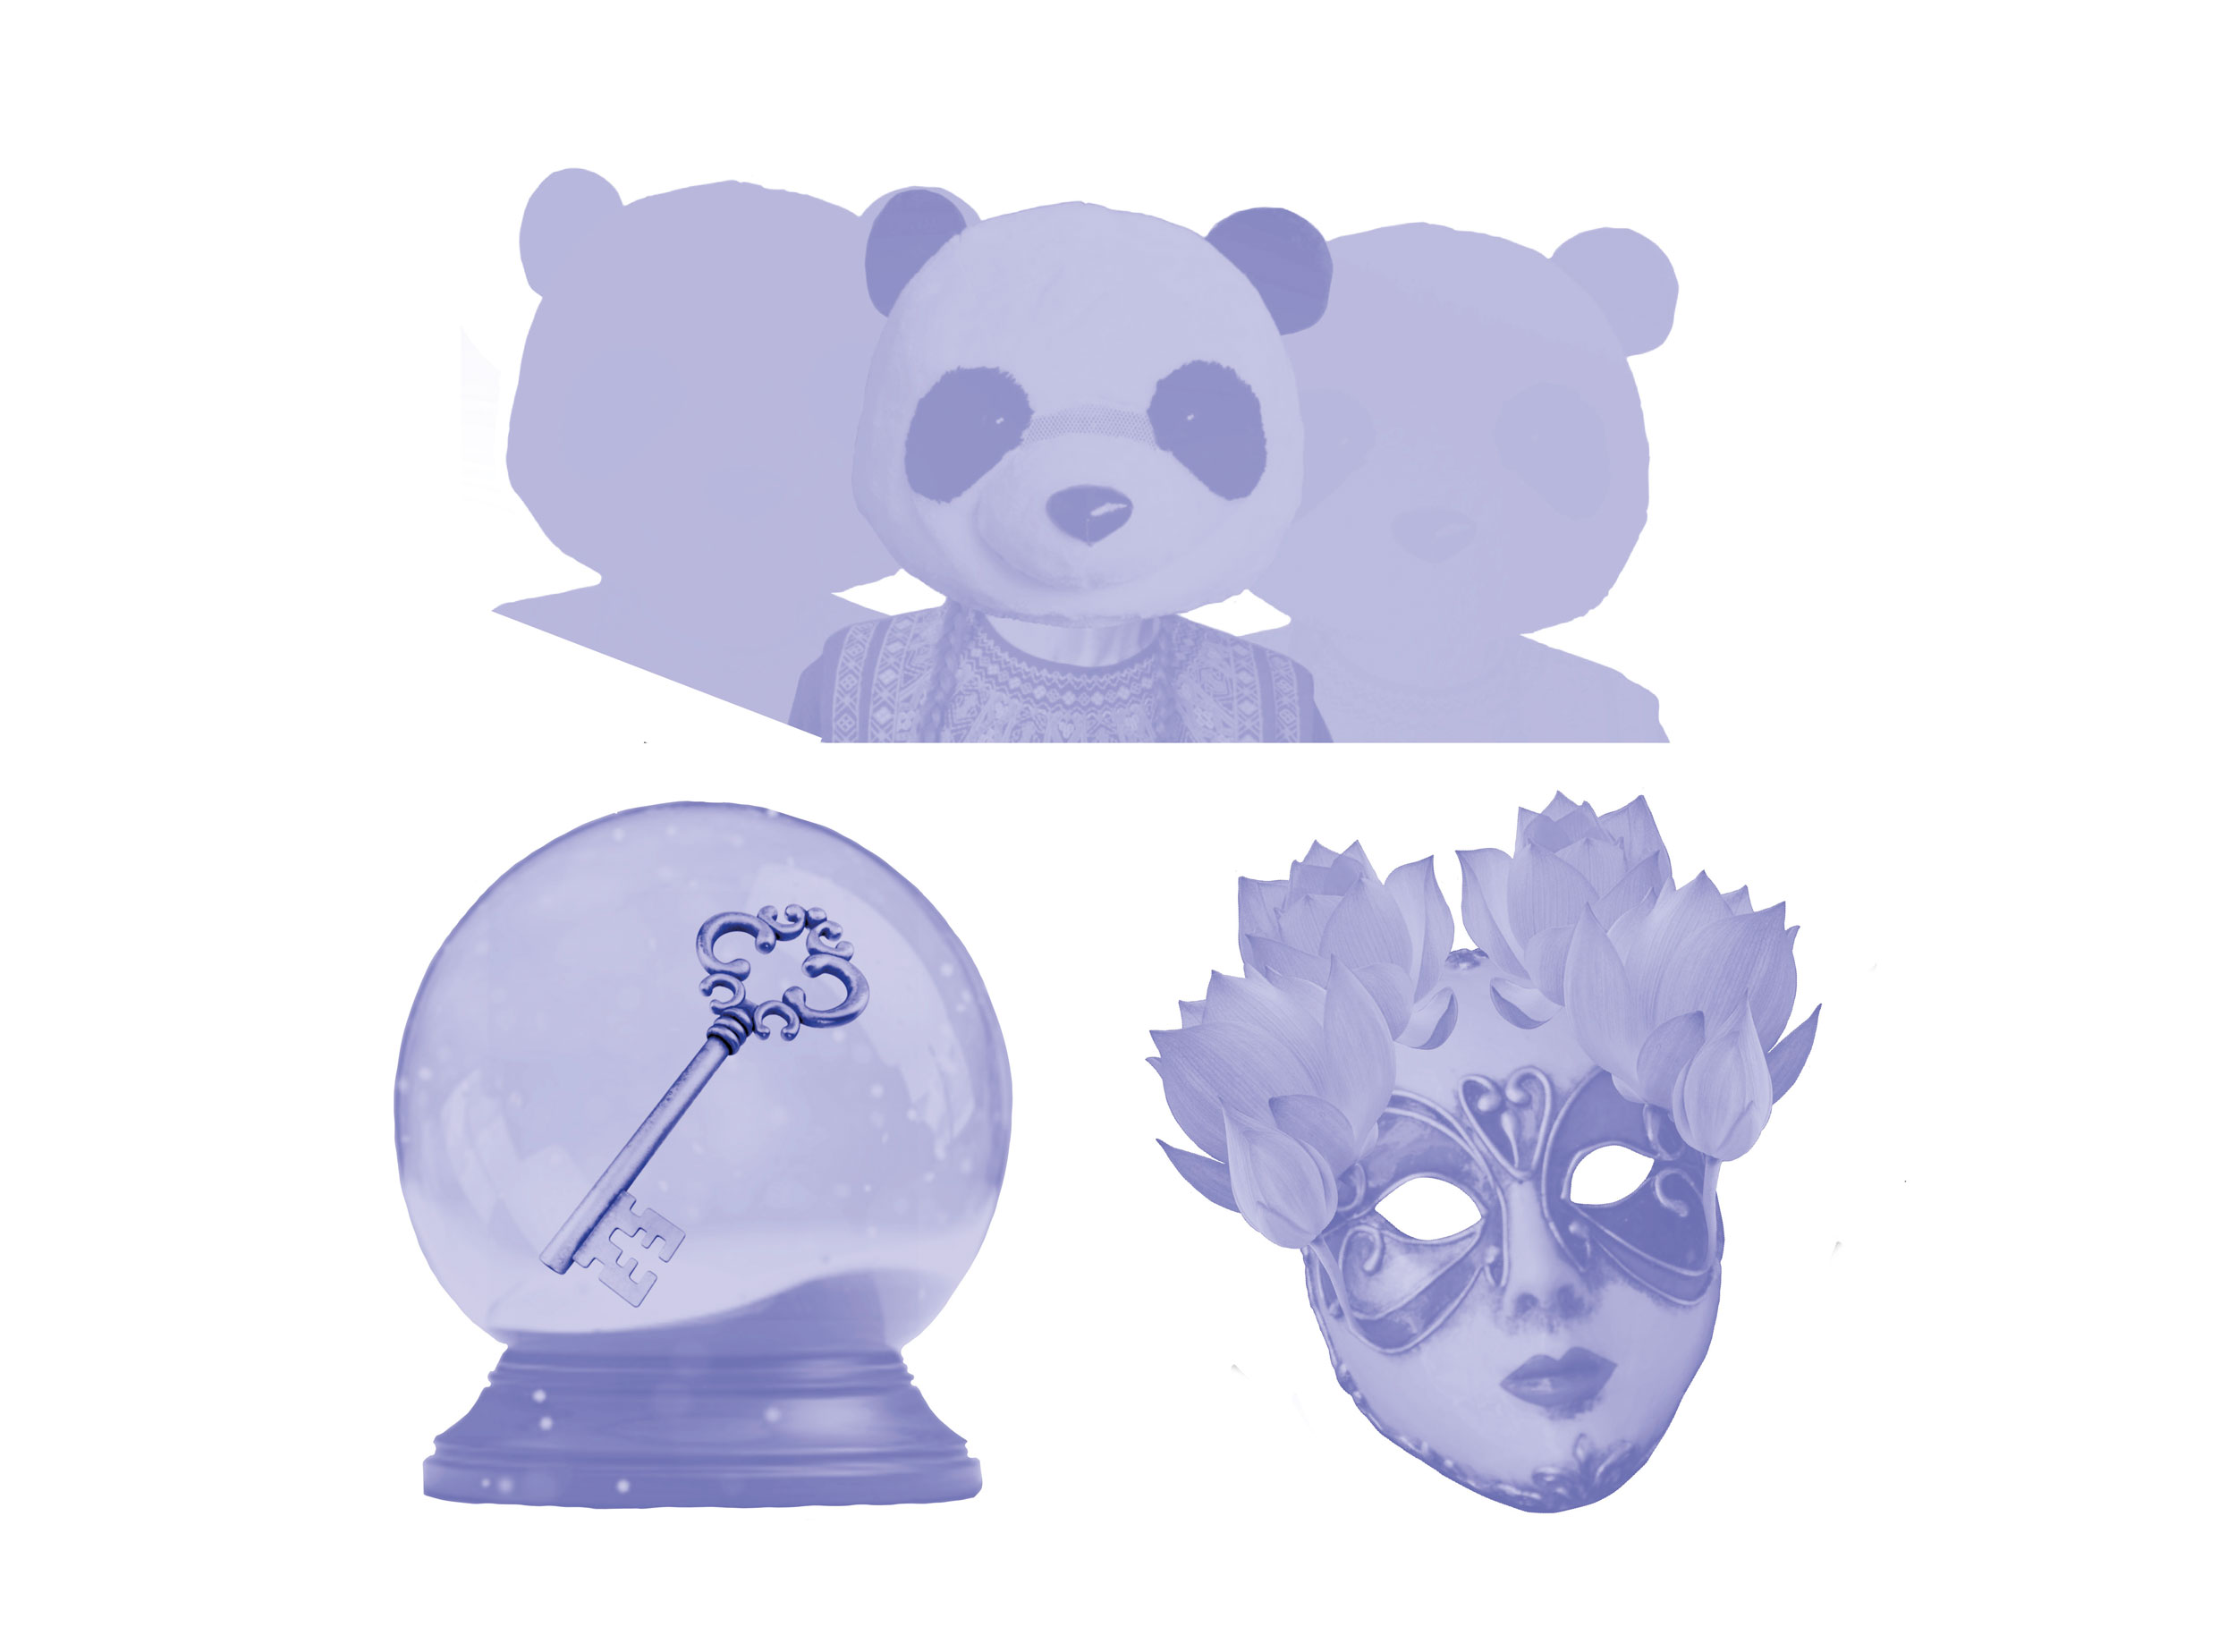 BA Digital Illustrations by Rebekah Zacharova for the songs Panda Chant 1, Memory Song, and masks. Shows a choir of pandas, a key in a memory globe and a decorative mask in lilac colour.